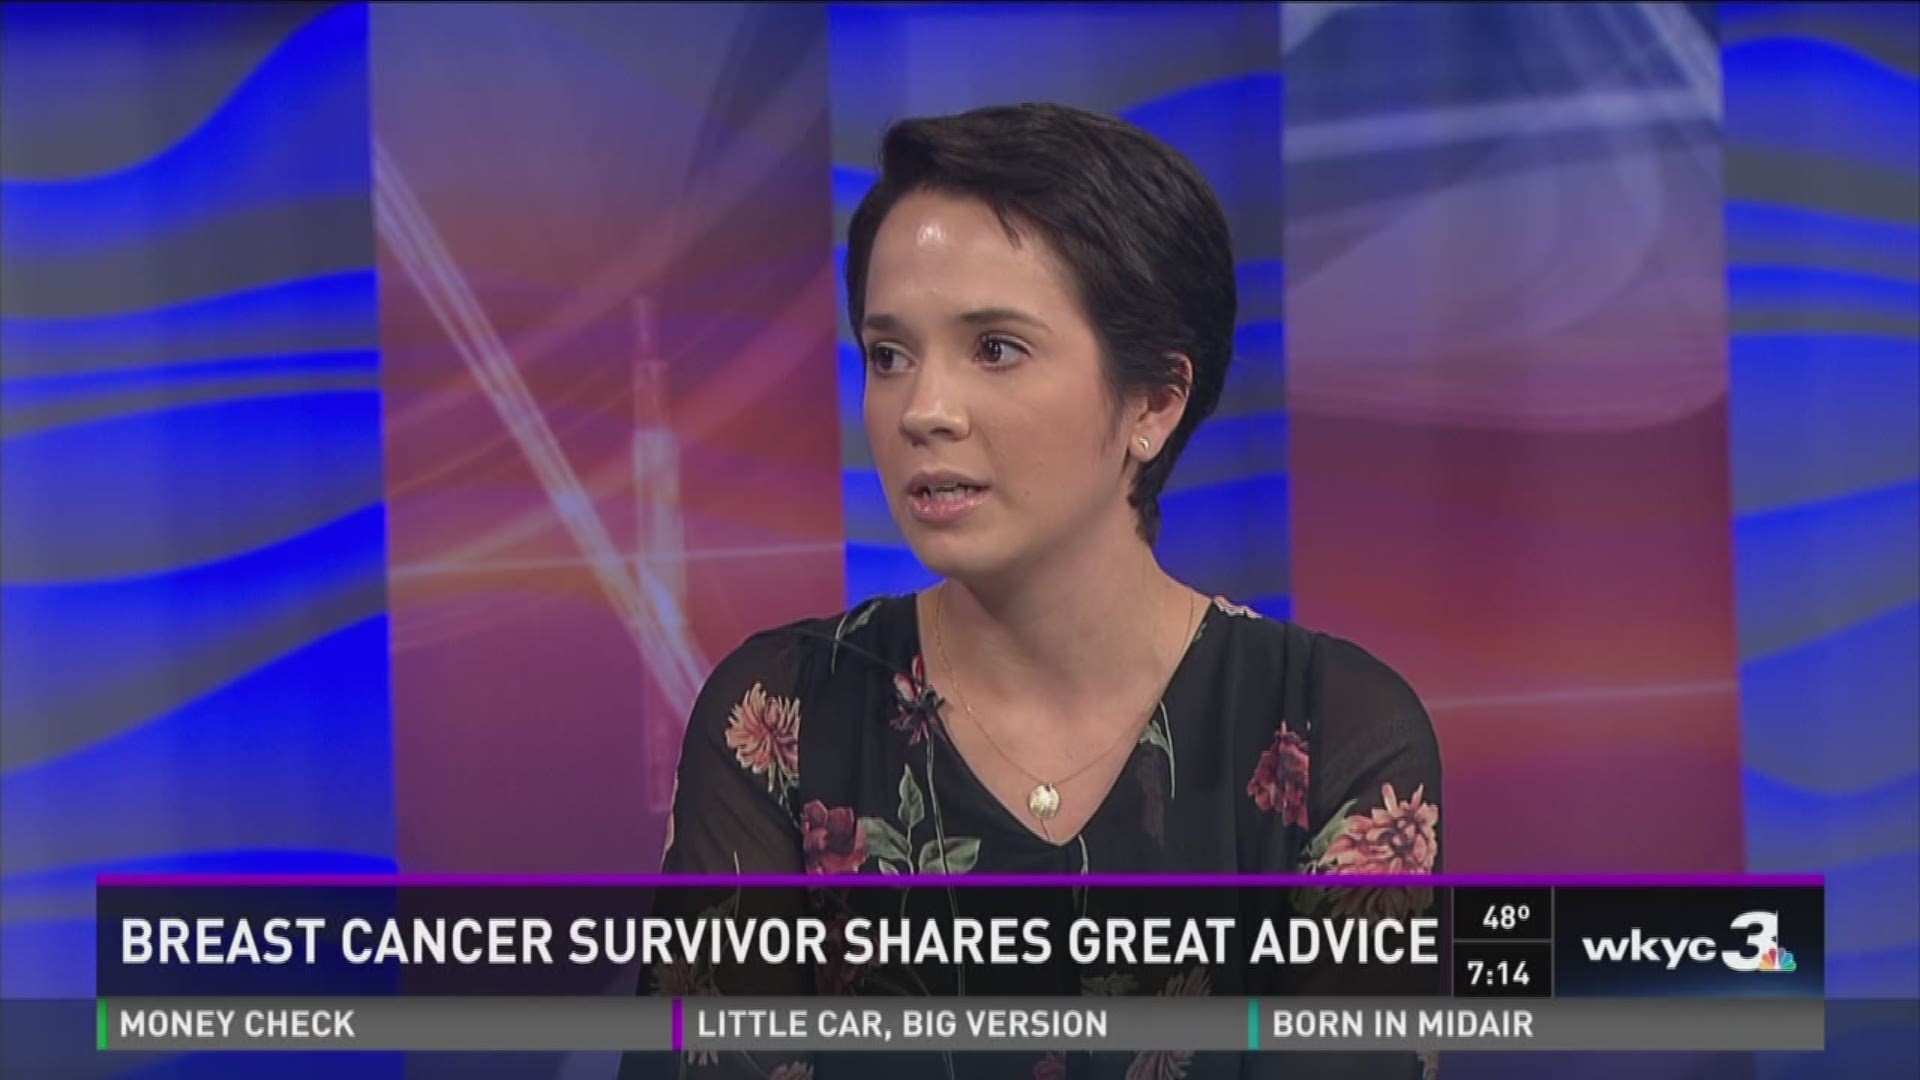 Woman goes from being cancer adviser to cancer survivor